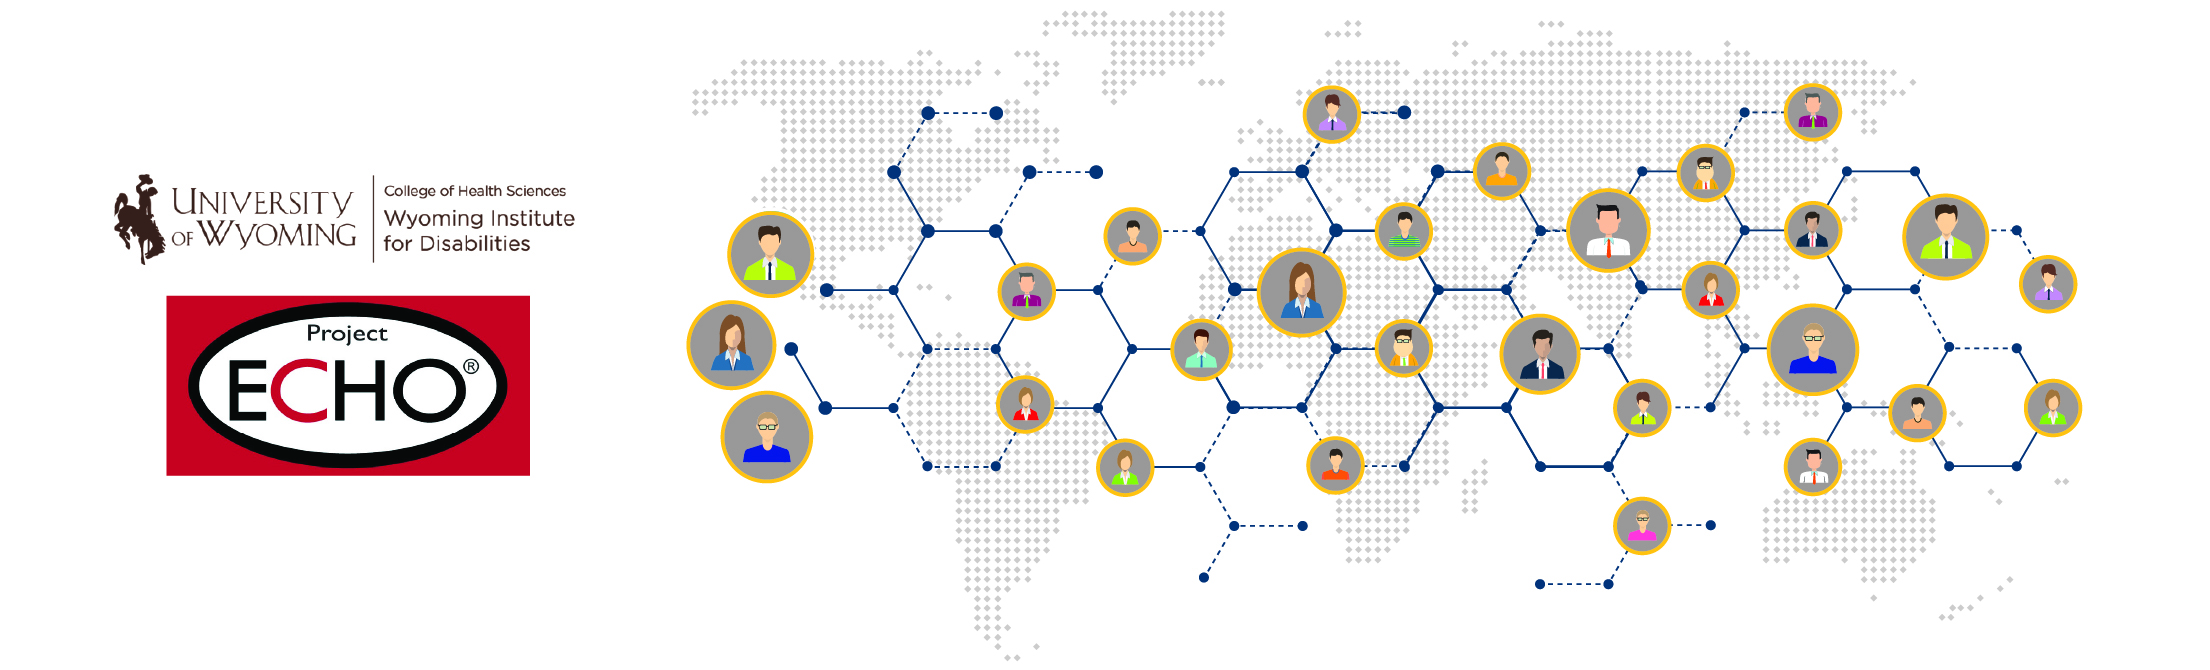 ECHO logo with network connections over world map